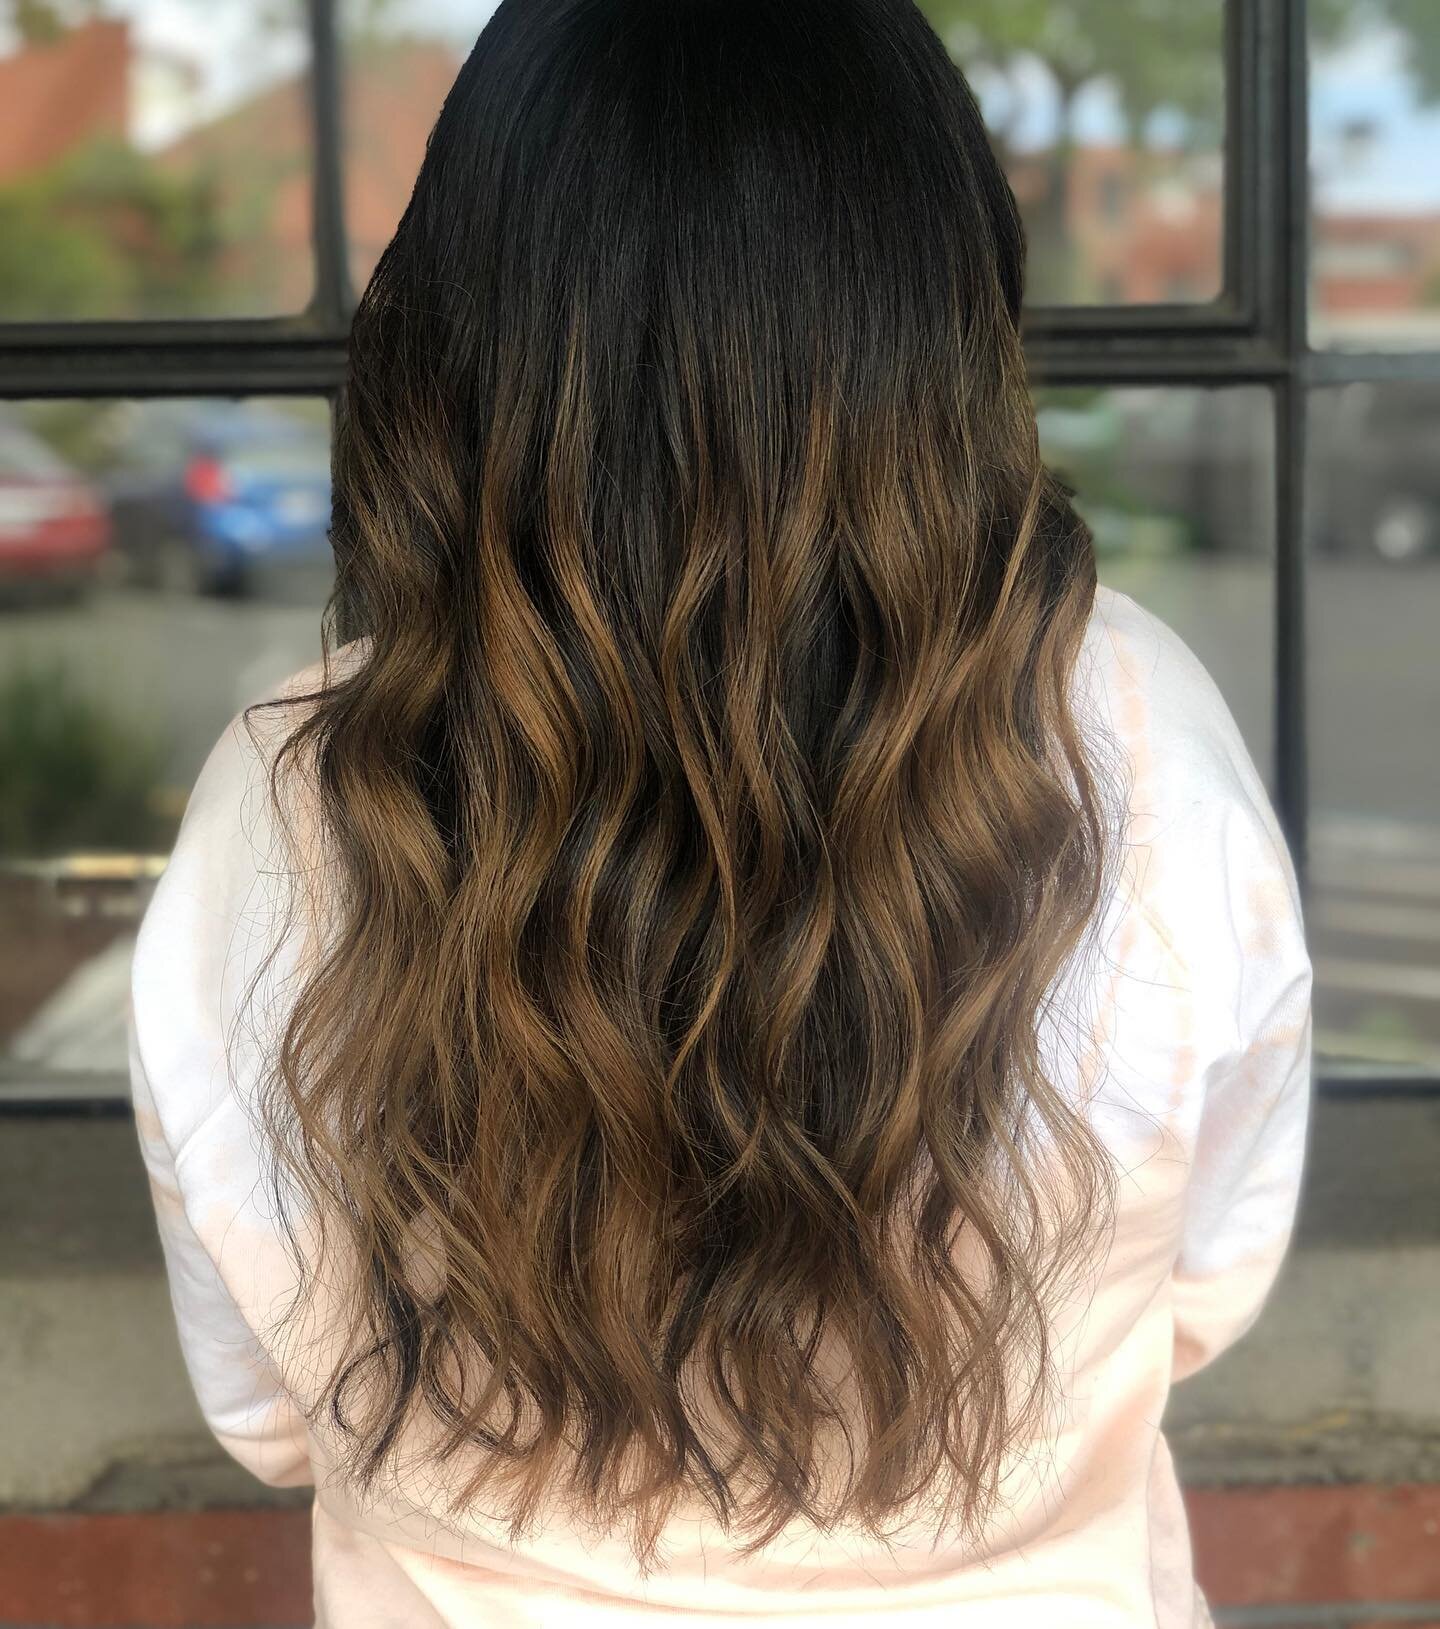 :: Peak at the before, swipe➡️
:
This is one session of a full highlight. You can see we placed them away from the root. This placement allows for it to be a little more low maintenance.
:
Looking for a subtle, new look for summer? Go to www.sageandm